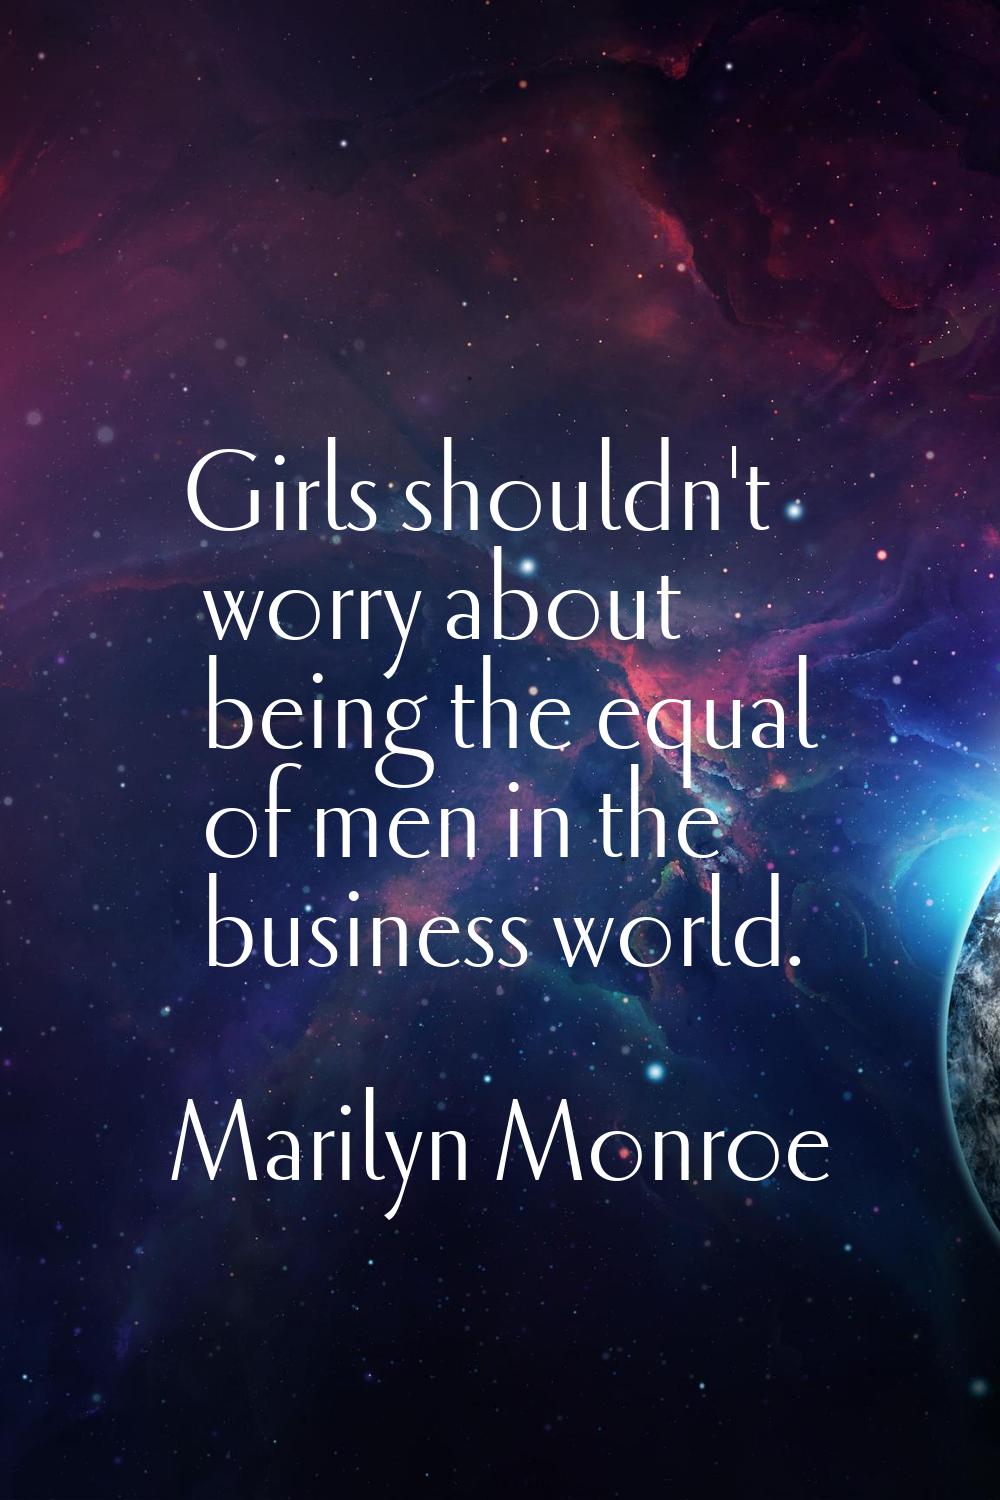 Girls shouldn't worry about being the equal of men in the business world.